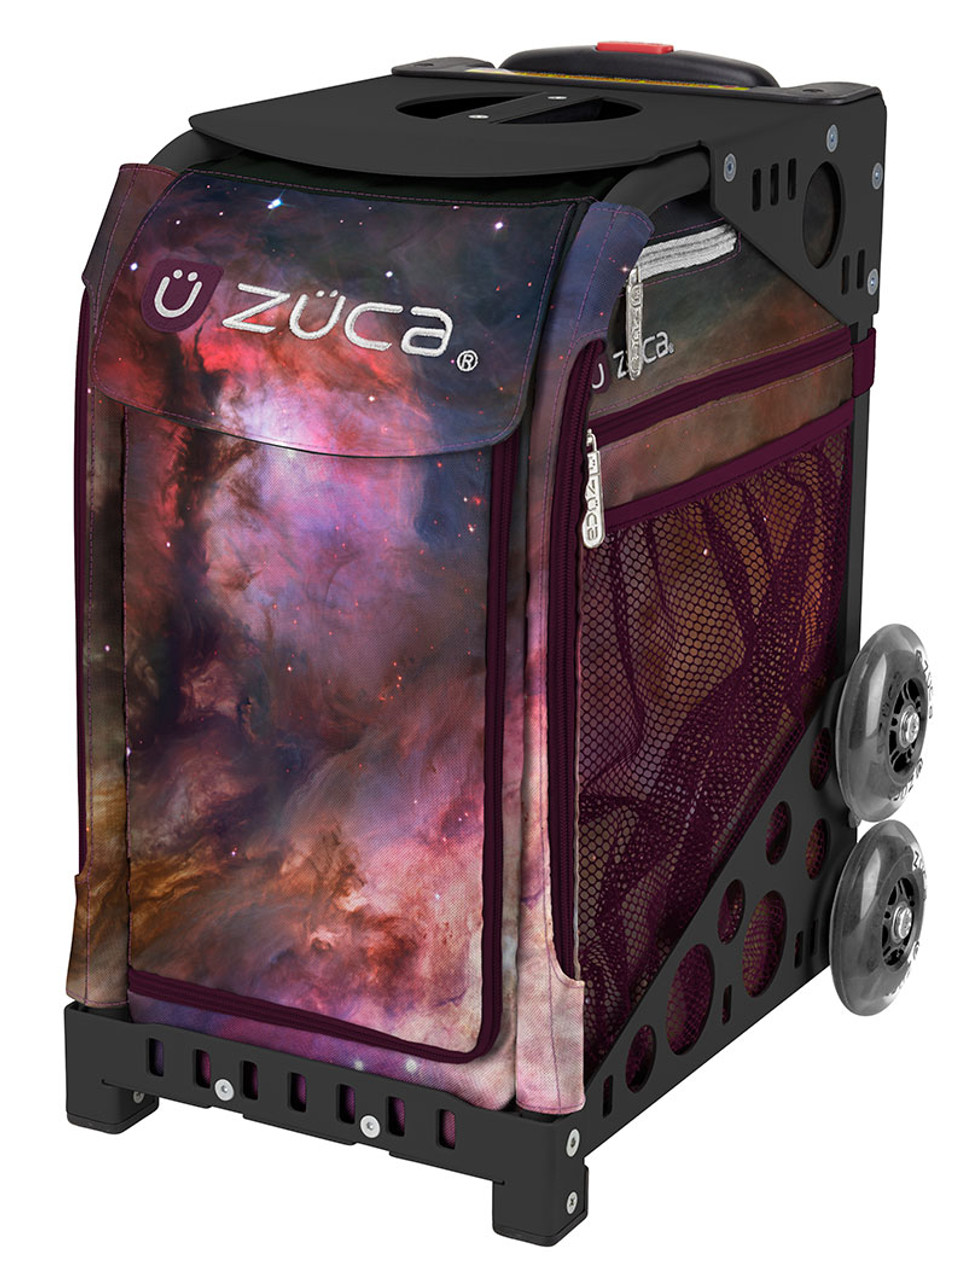 Galaxy
Travel through your solar system in stellar style with this other-worldly design.